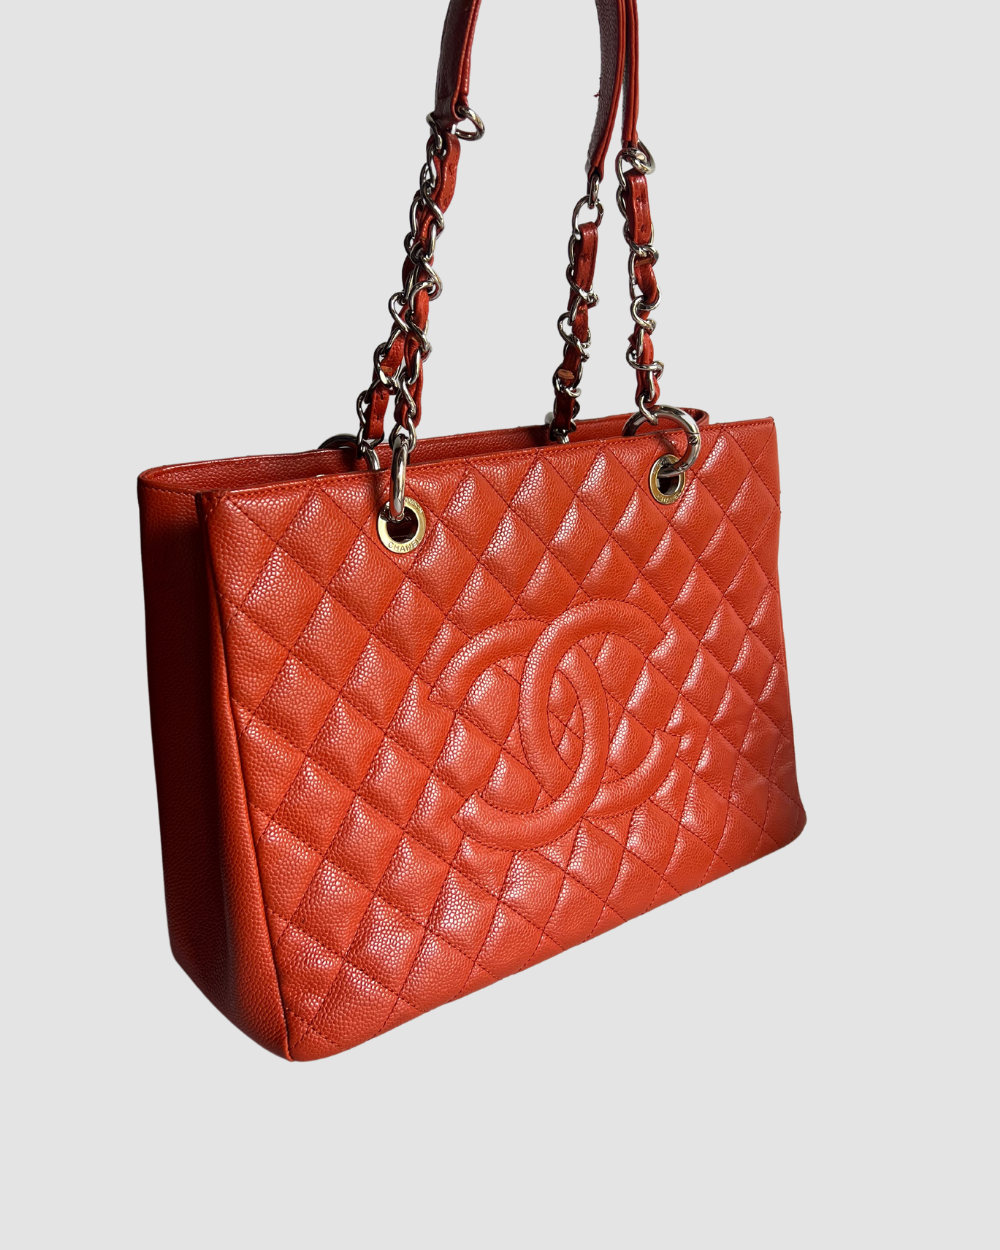 Chanel GST Grand Shopping Tote Shoulder Bag Red Caviar Leather